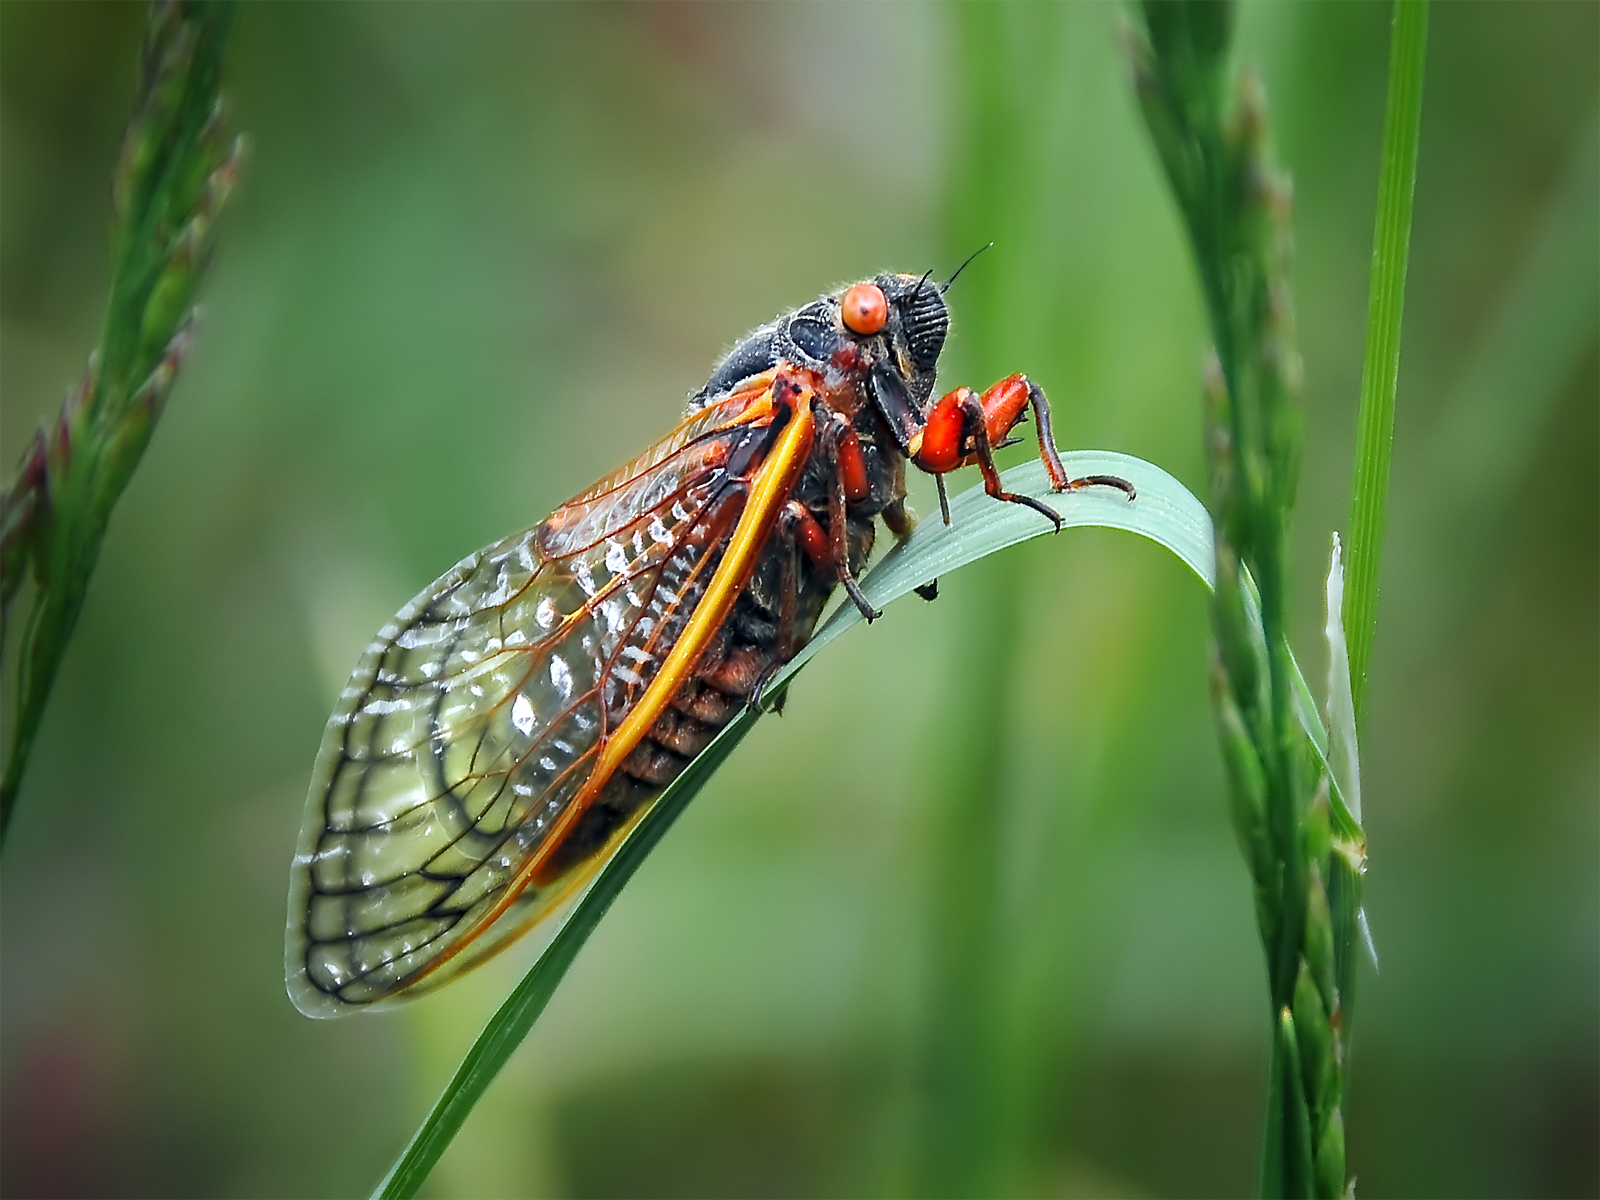 Trillions Of Brood 10 Cicadas To Emerge In Us After 17 Years Underground 